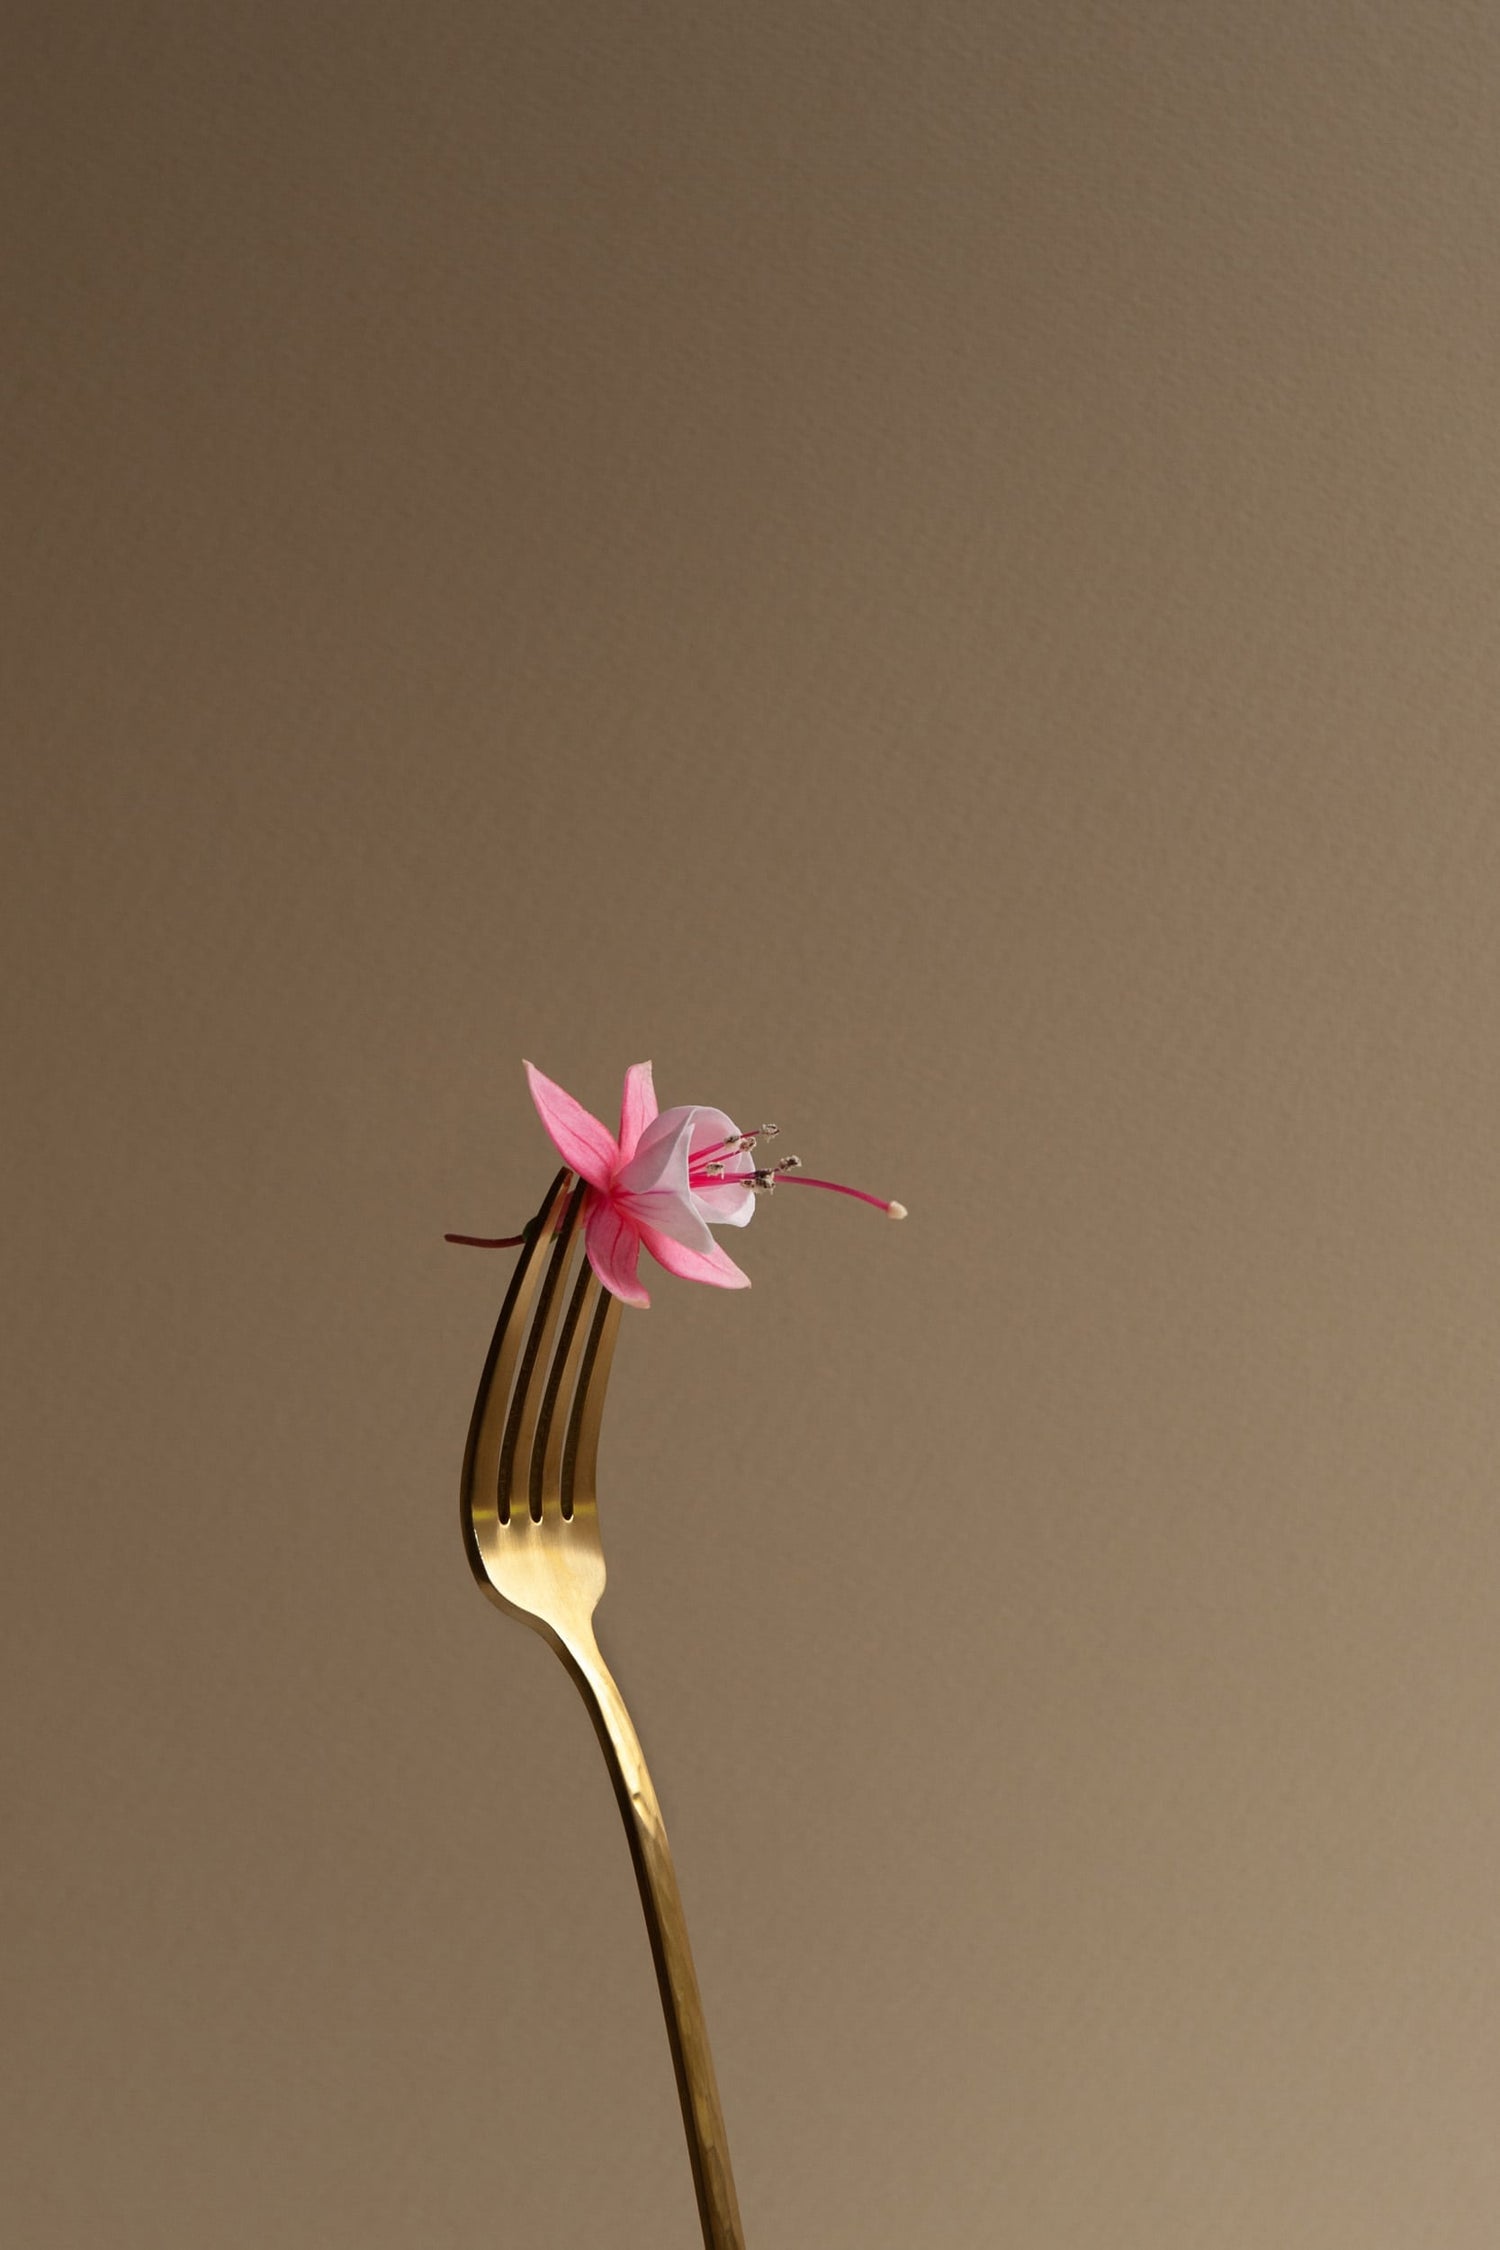 The artpiece 'Equipoise' by Erica Ferraroni shows a perfectly balanced golden fork standing up, with a pink flower delicately placed in between the prongs of the fork on the top.